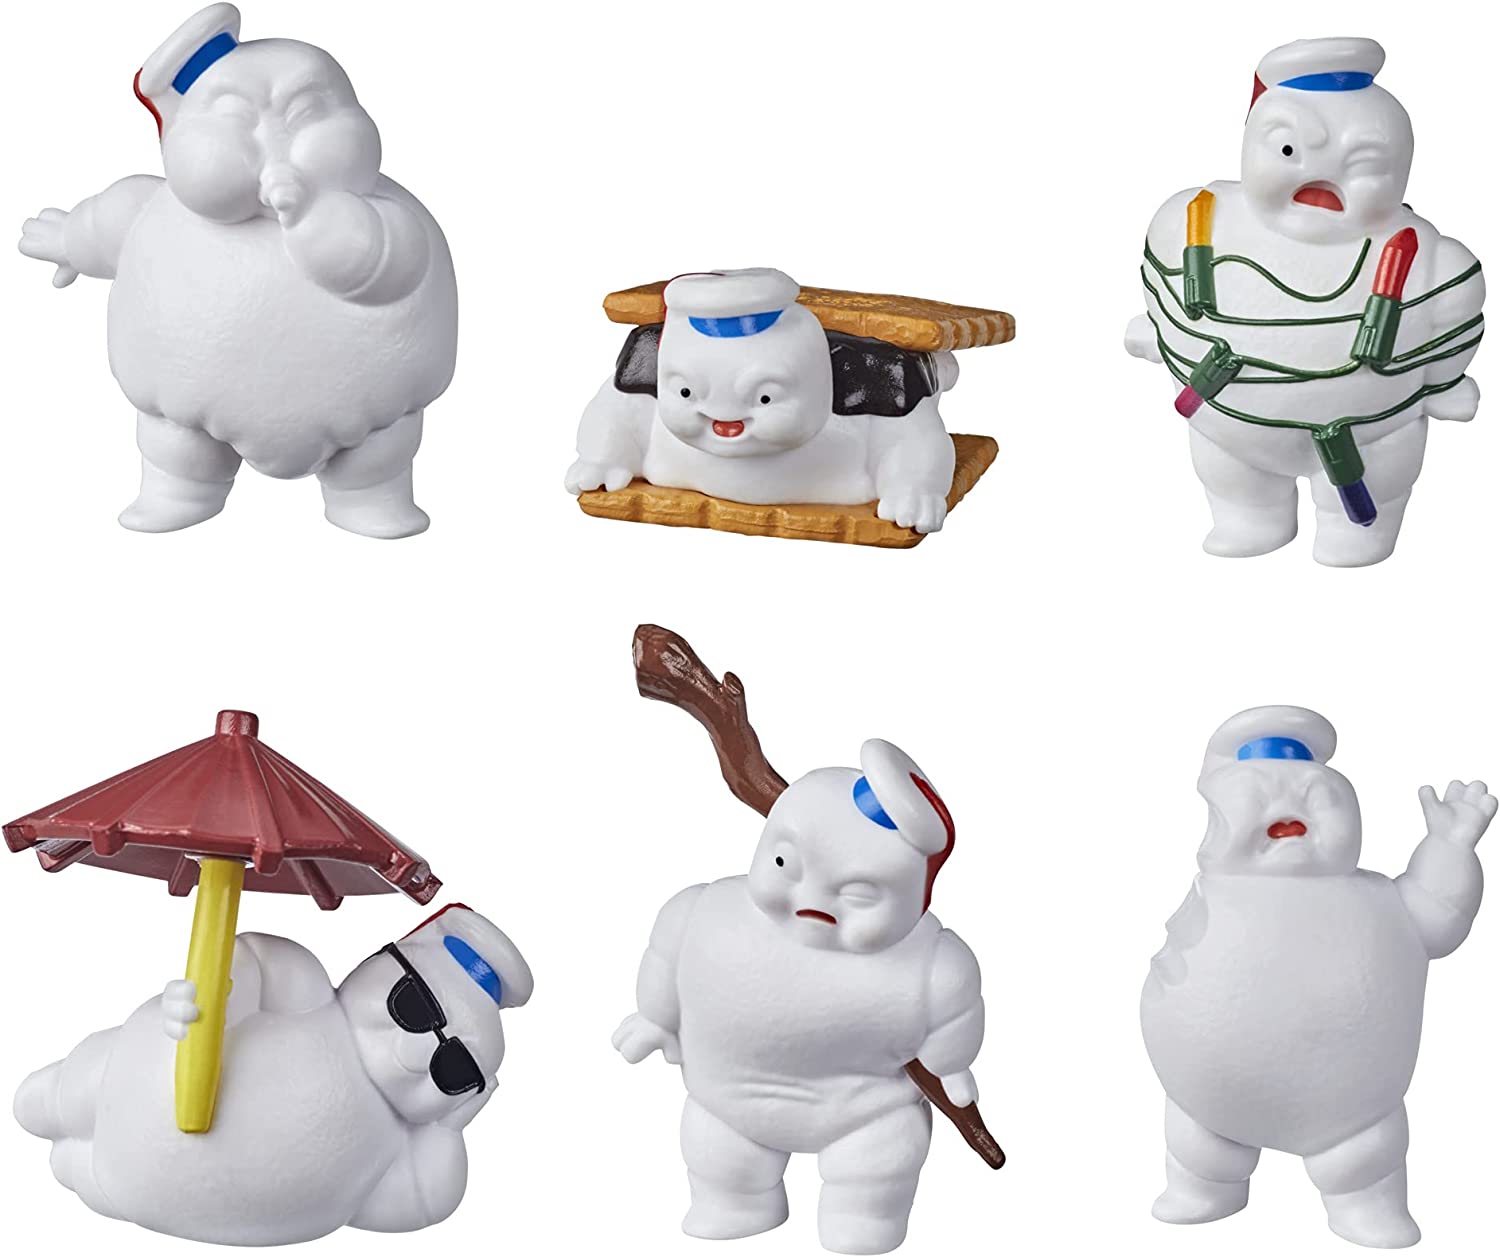 Ghostbusters Stay Puft Products Mini-Puft Surprise, Series 3, Randomly Assorted 1.5-Inch-Scale Figures, 6 to Collect, Kids Ages 4 and Up E9547